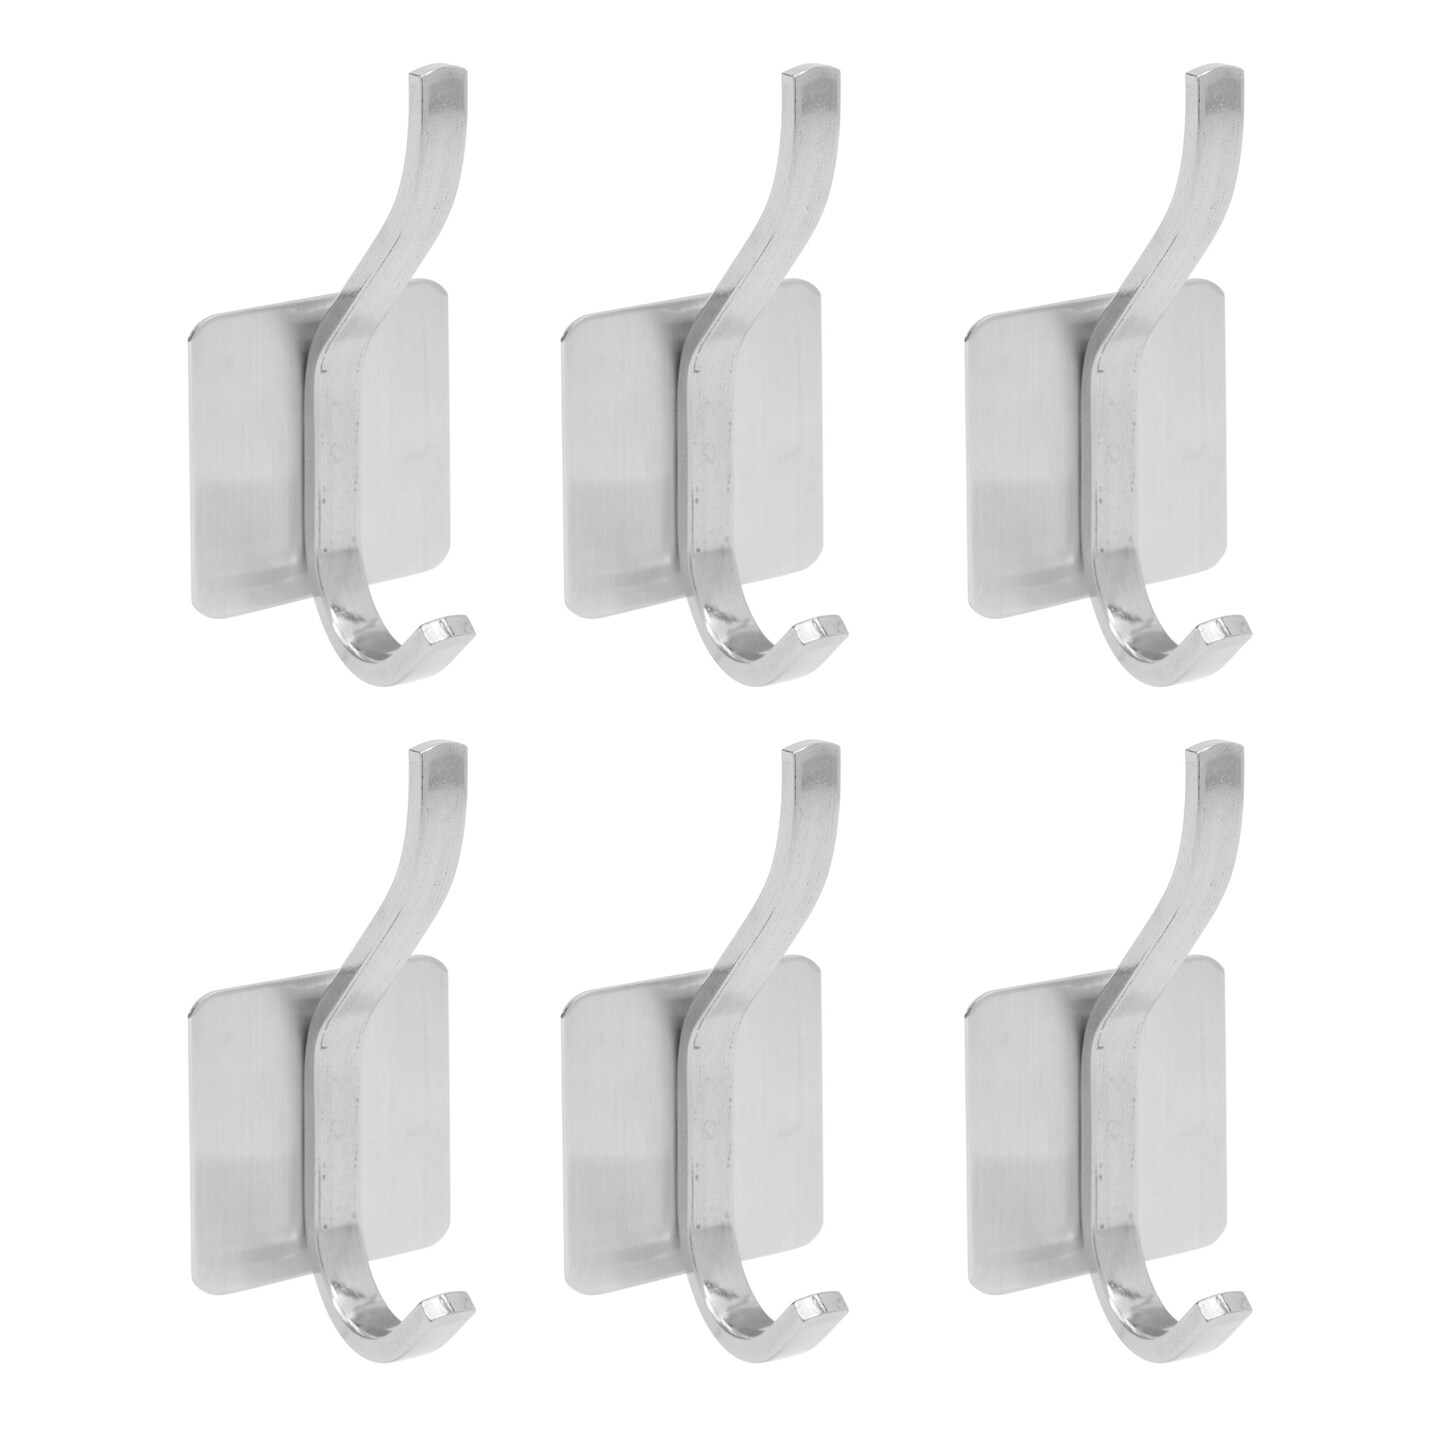 6 Pack Double Post Adhesive Wall Hooks, Heavy Duty Stainless Steel